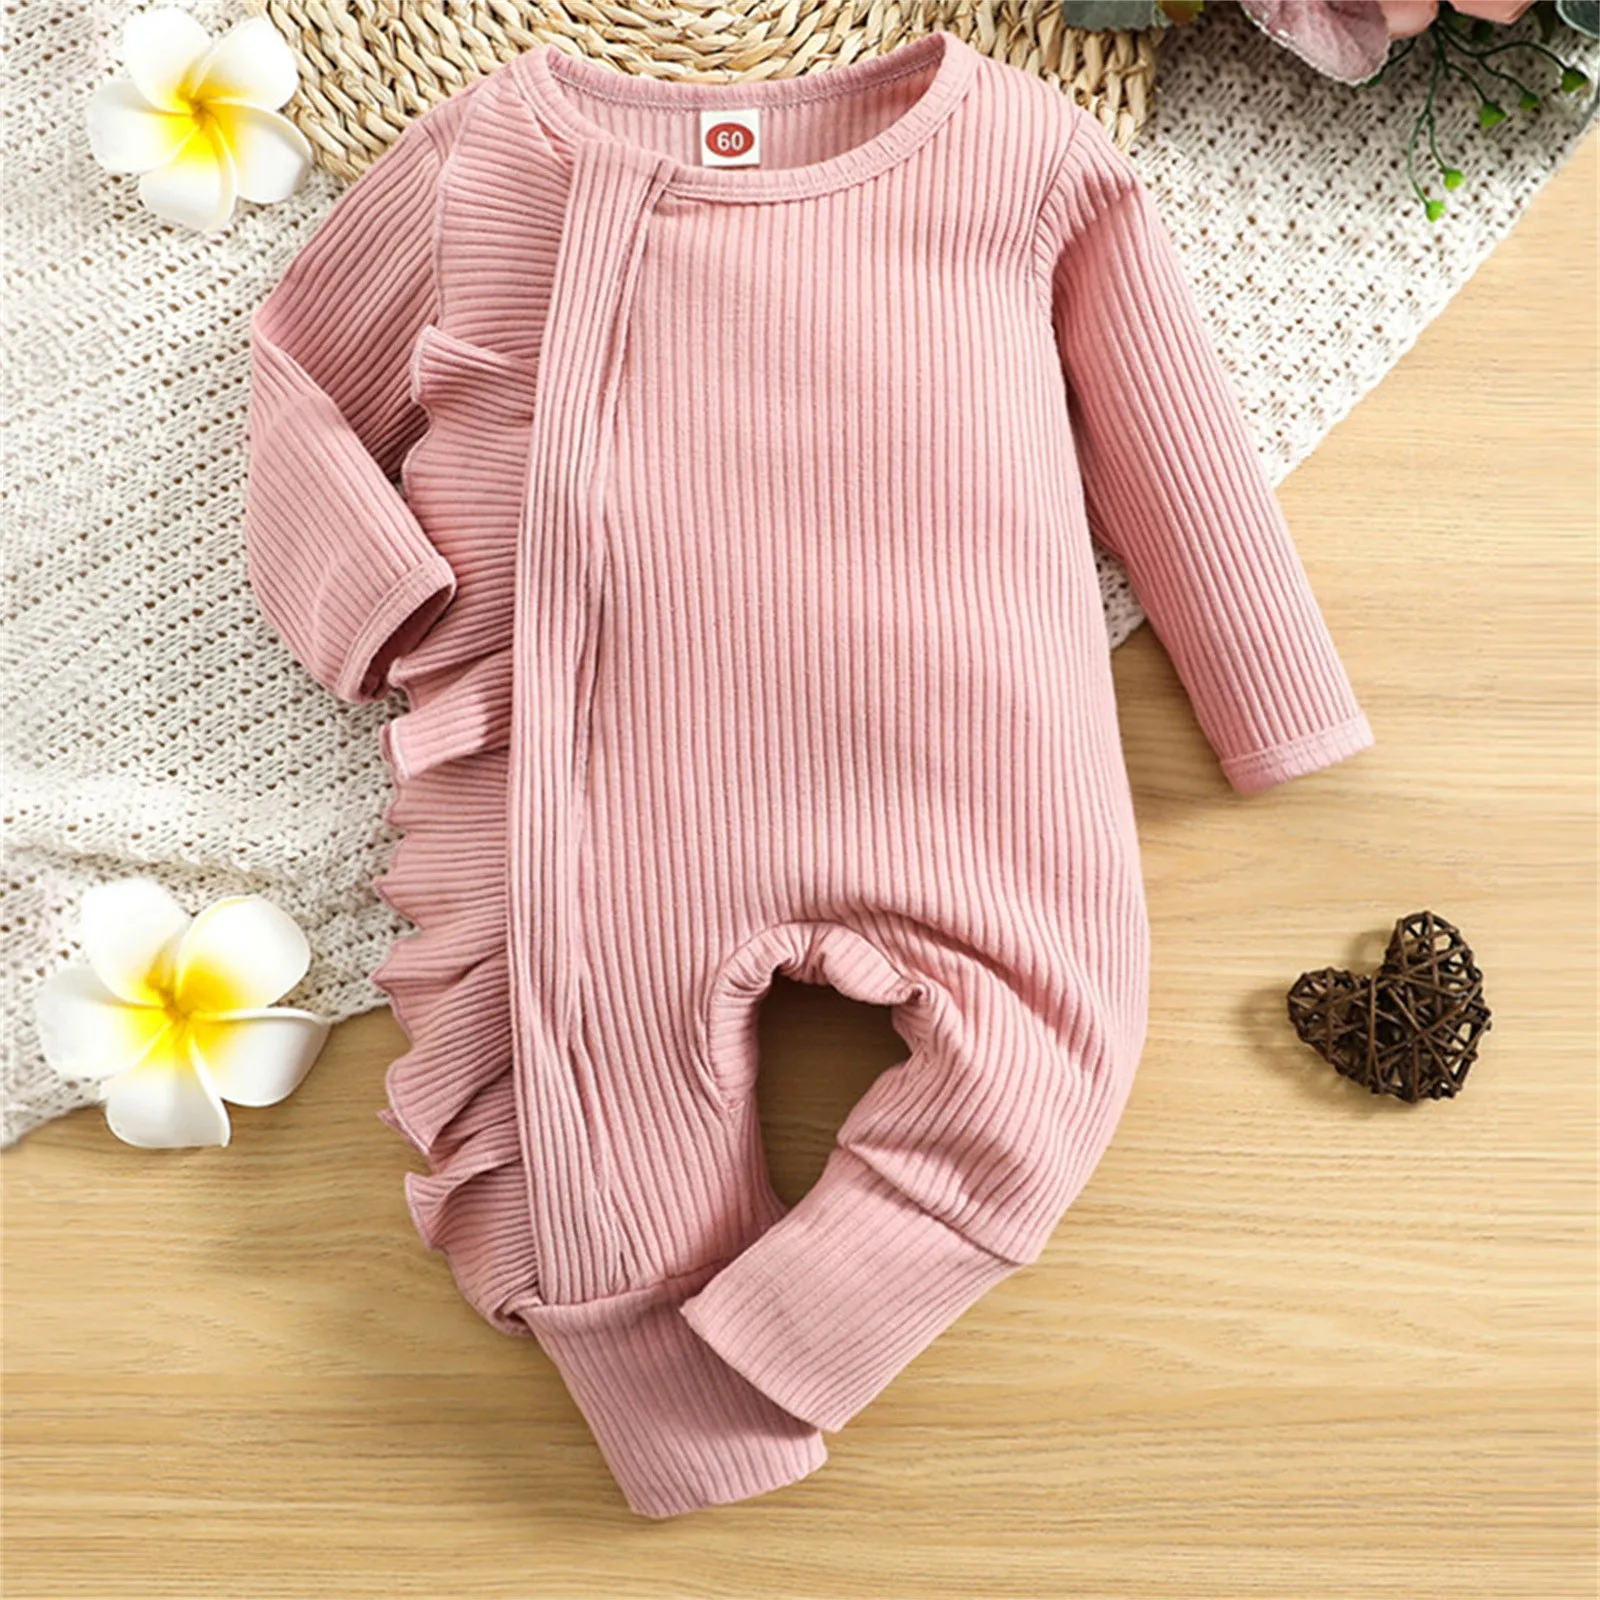 

Autumn Newborn Infant Jumpsuit Baby Girls Boys Solid Ruffle Long Sleeve Ribbed Romper Playsuit Casual Overalls Clothes 0-24M